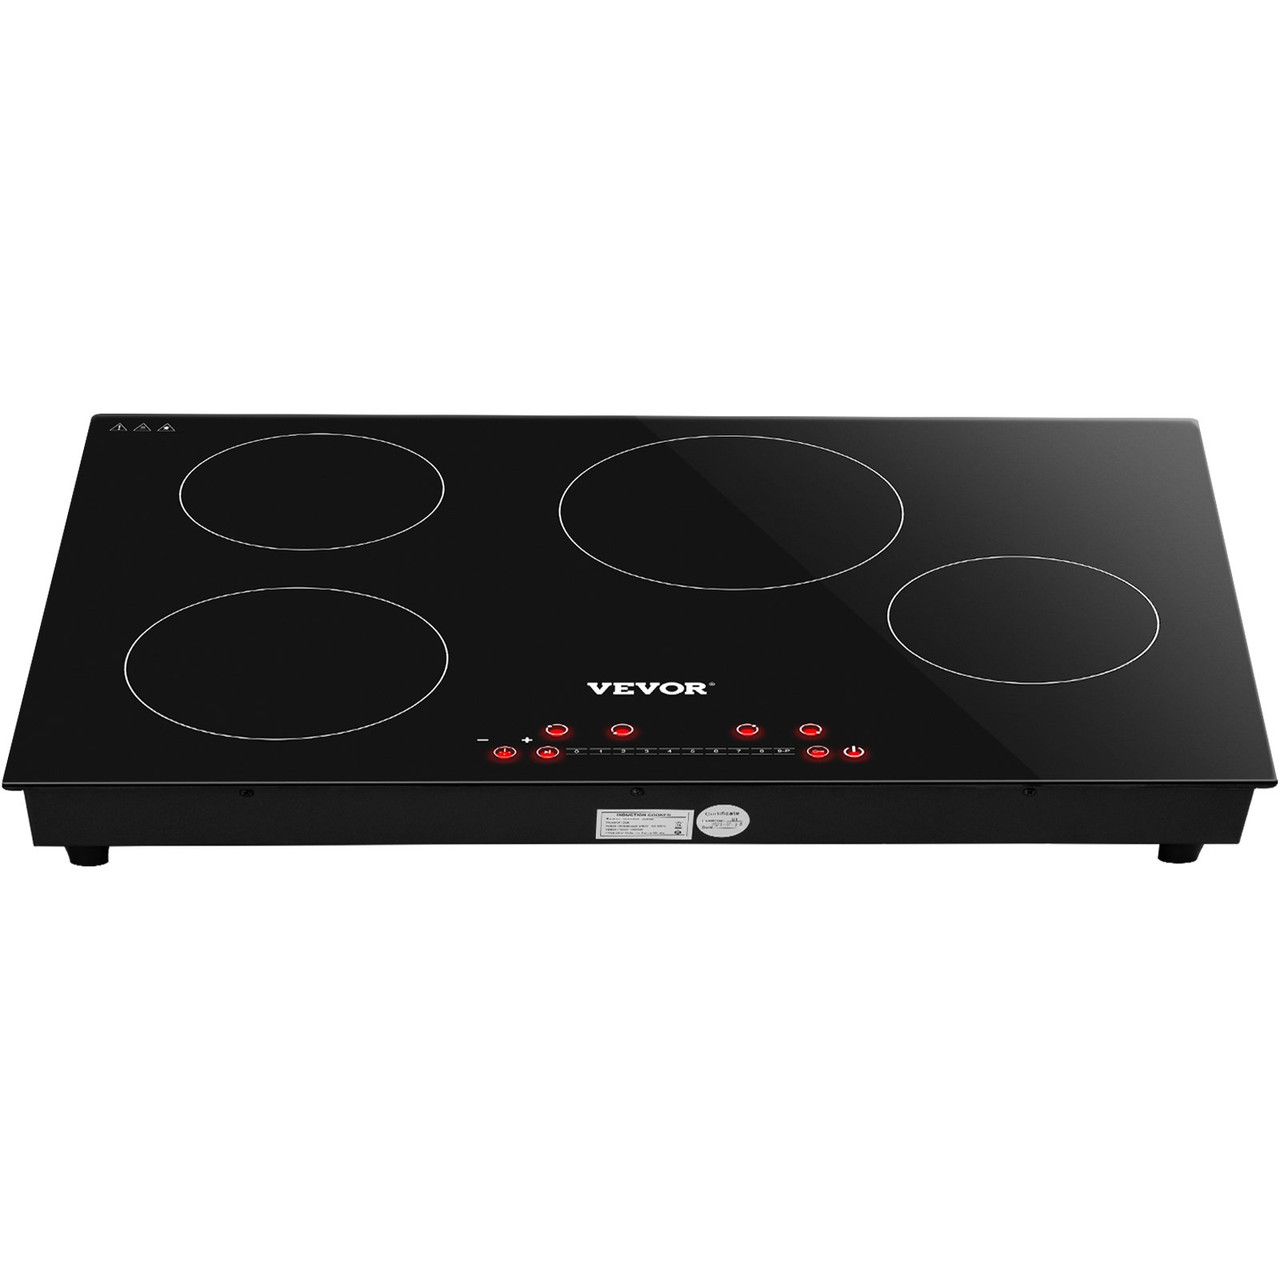 Built-in Induction Electric Stove Top 30 Inch,4 Burners Electric Cooktop,9 Power Levels & Sensor Touch Control,Easy to Clean Ceramic Glass